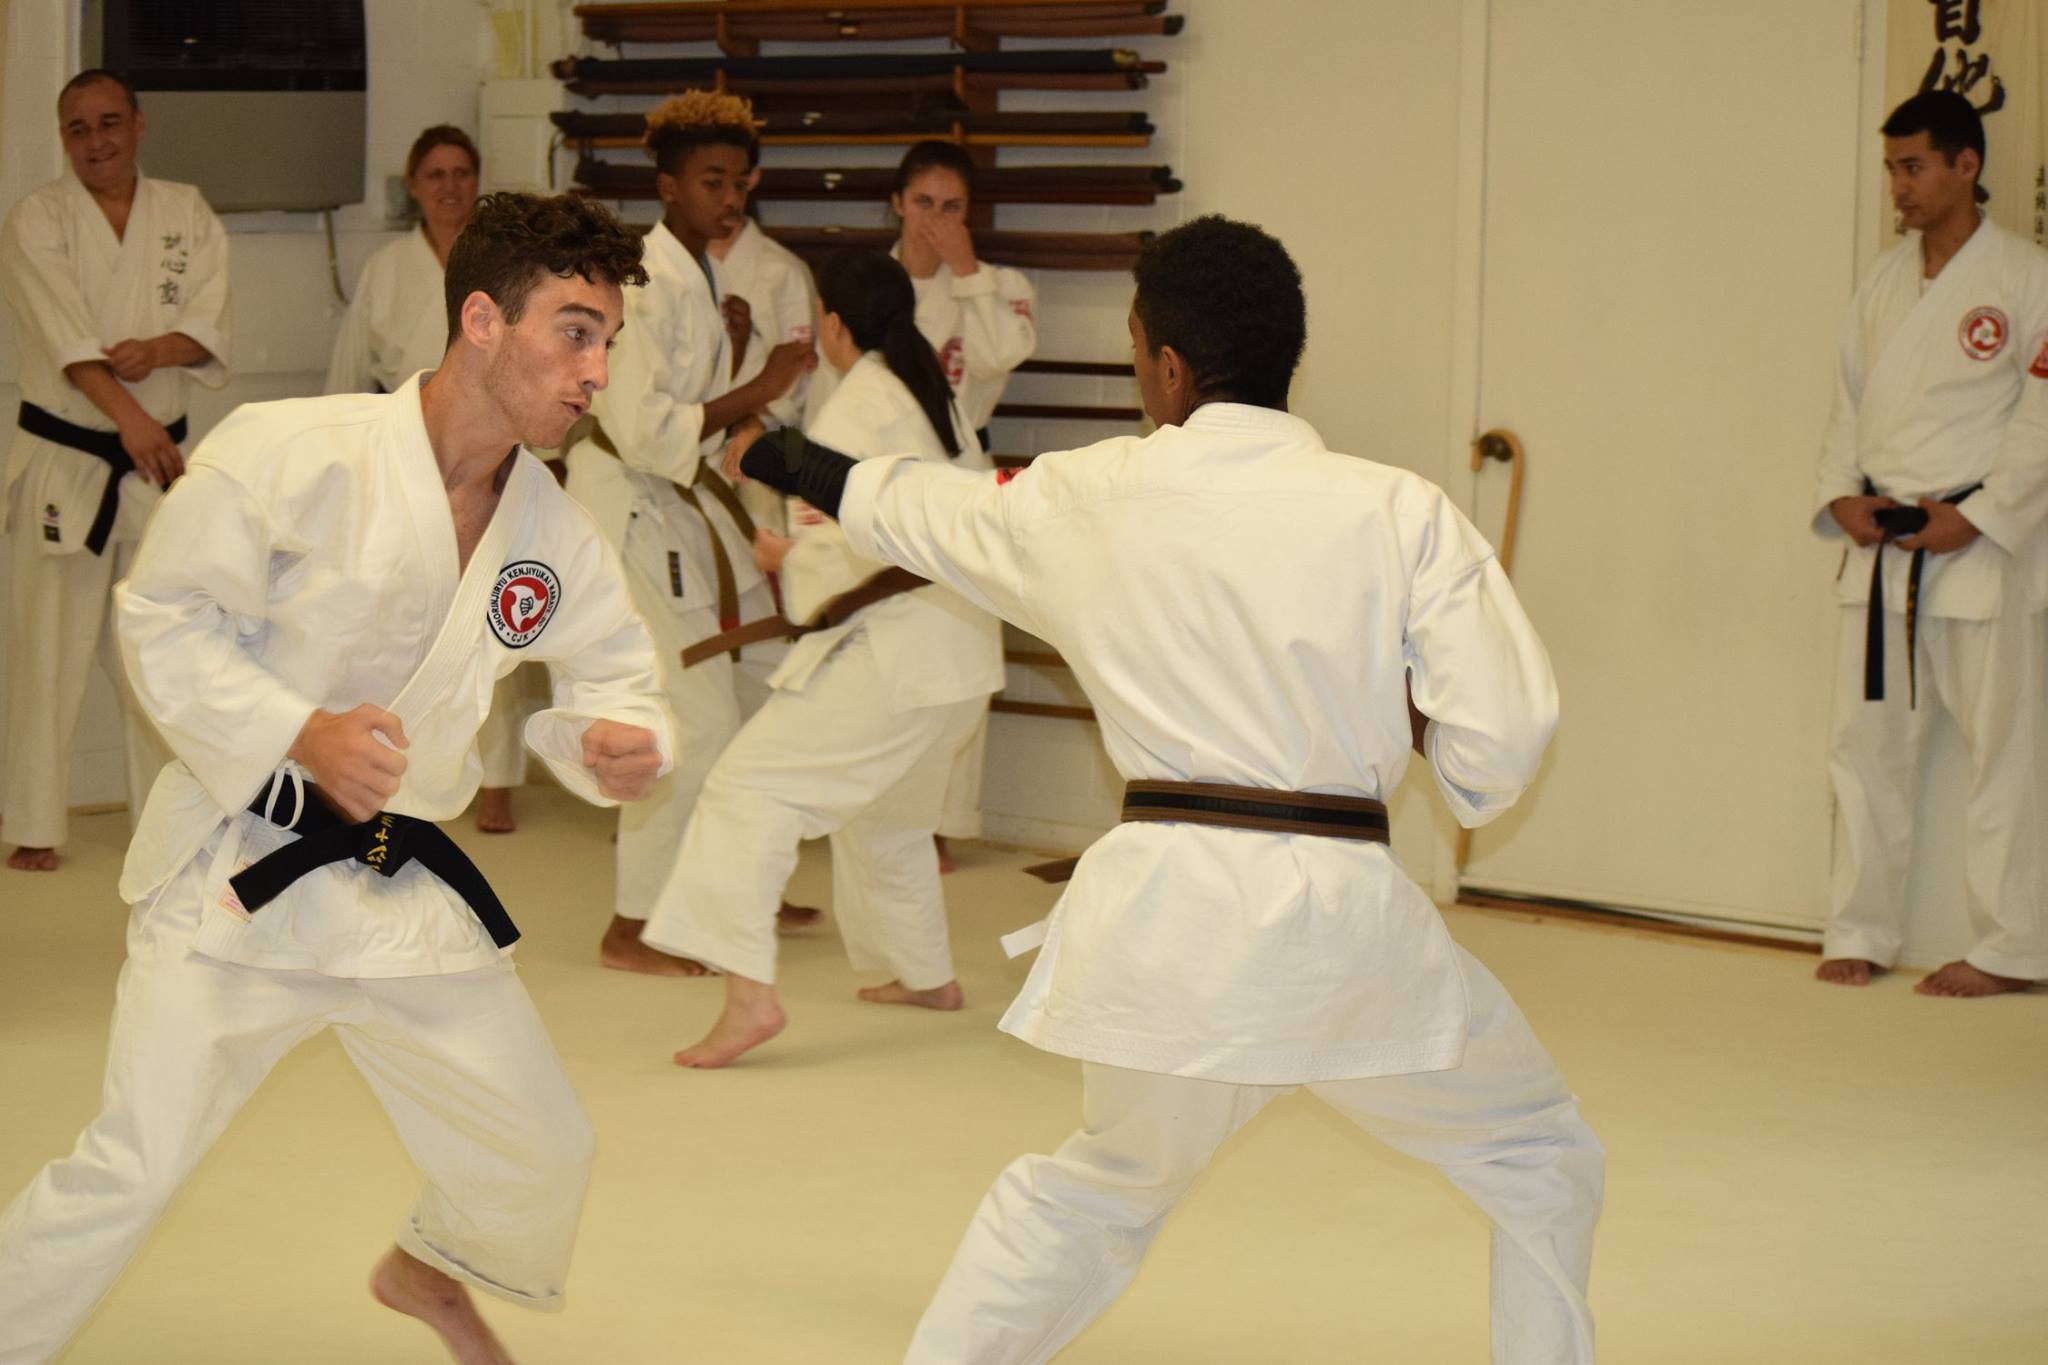 Gallery - Japan Karate and Judo Center